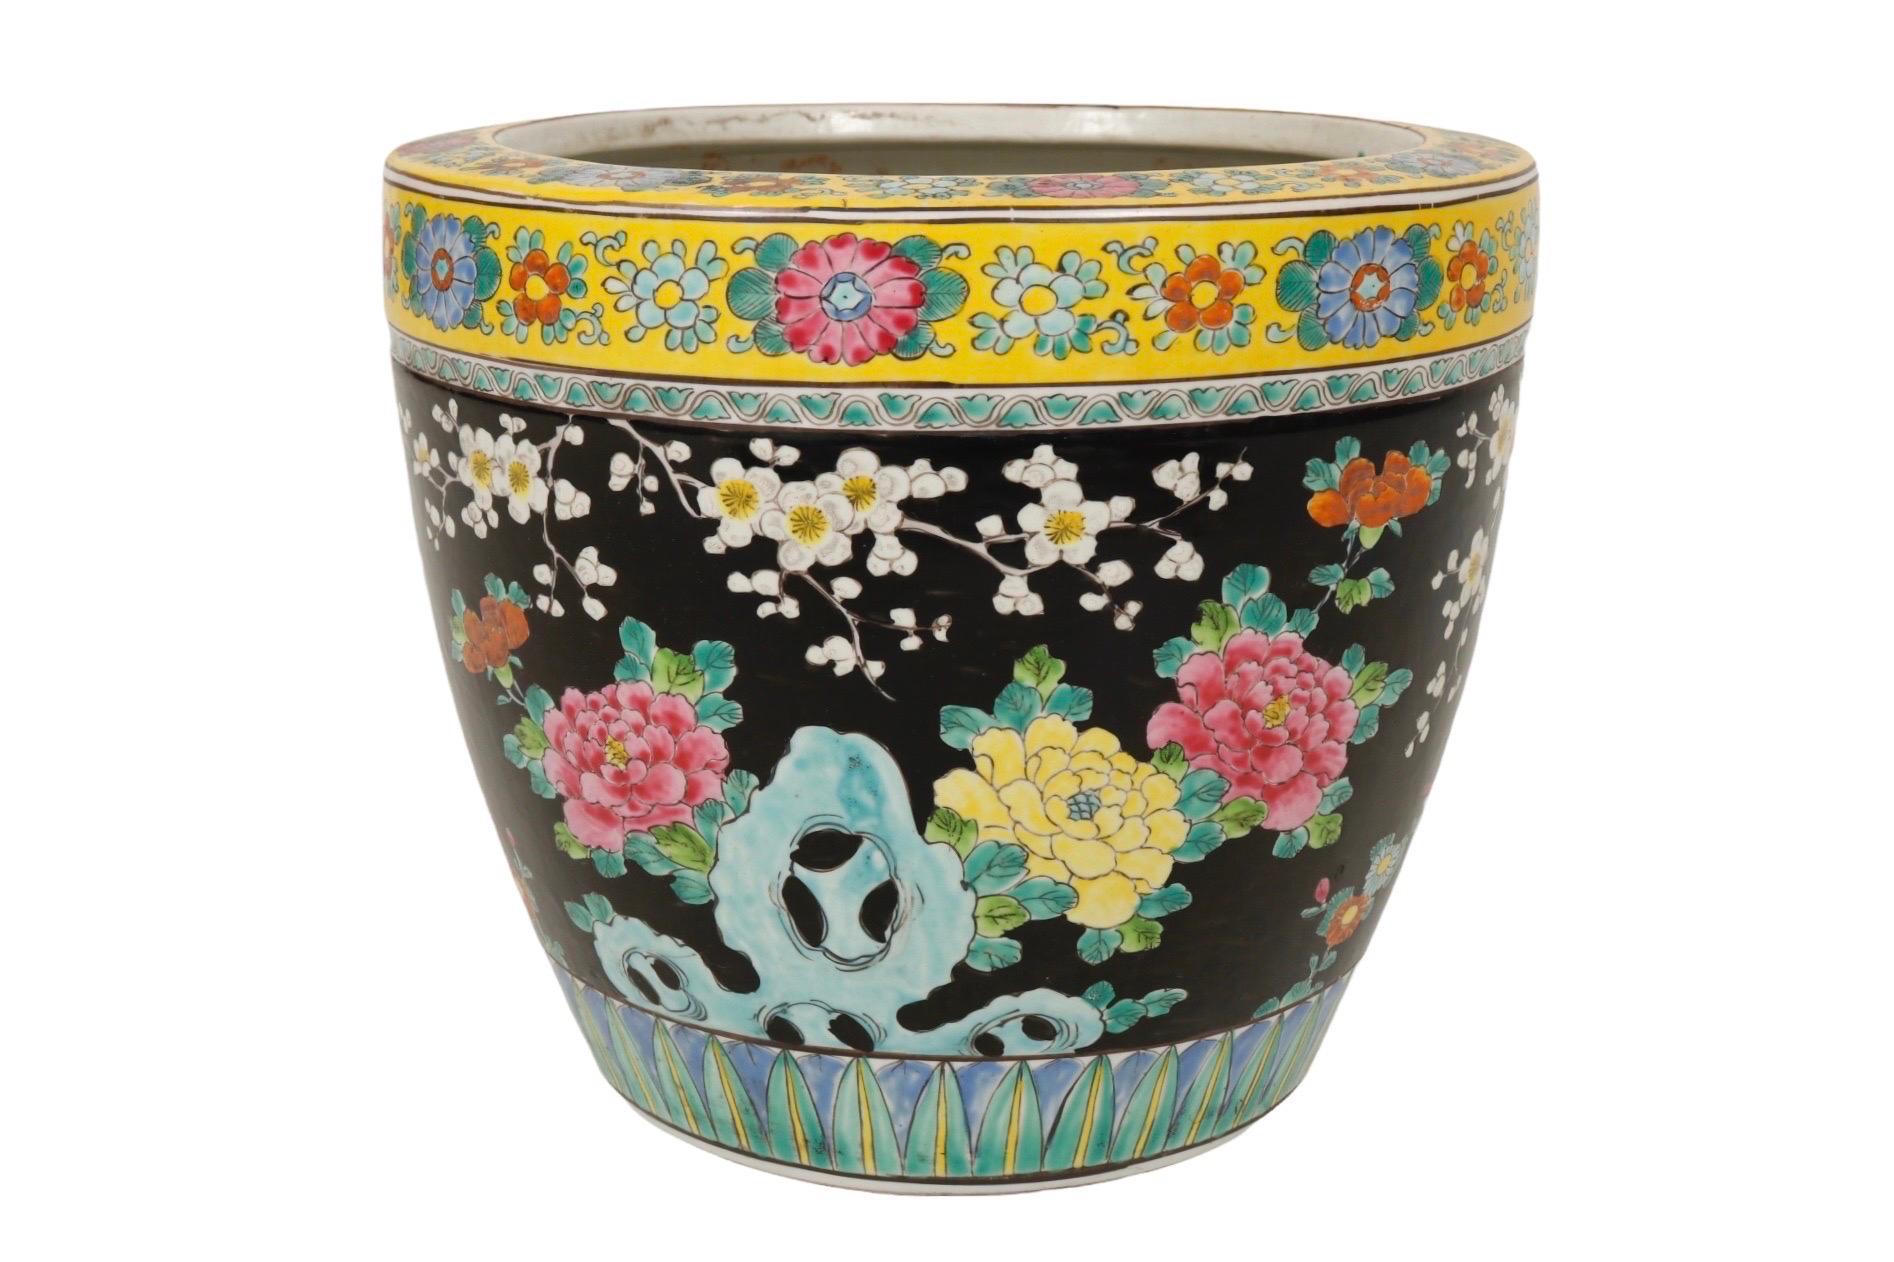 A Japanese hand painted Satsuma earthenware planter. The satsuma mark, often incorporated in the design, can be seen in the large green plant-like ribbon on the back. Made of earthenware, it’s decorated with two ornately detailed pheasants, large